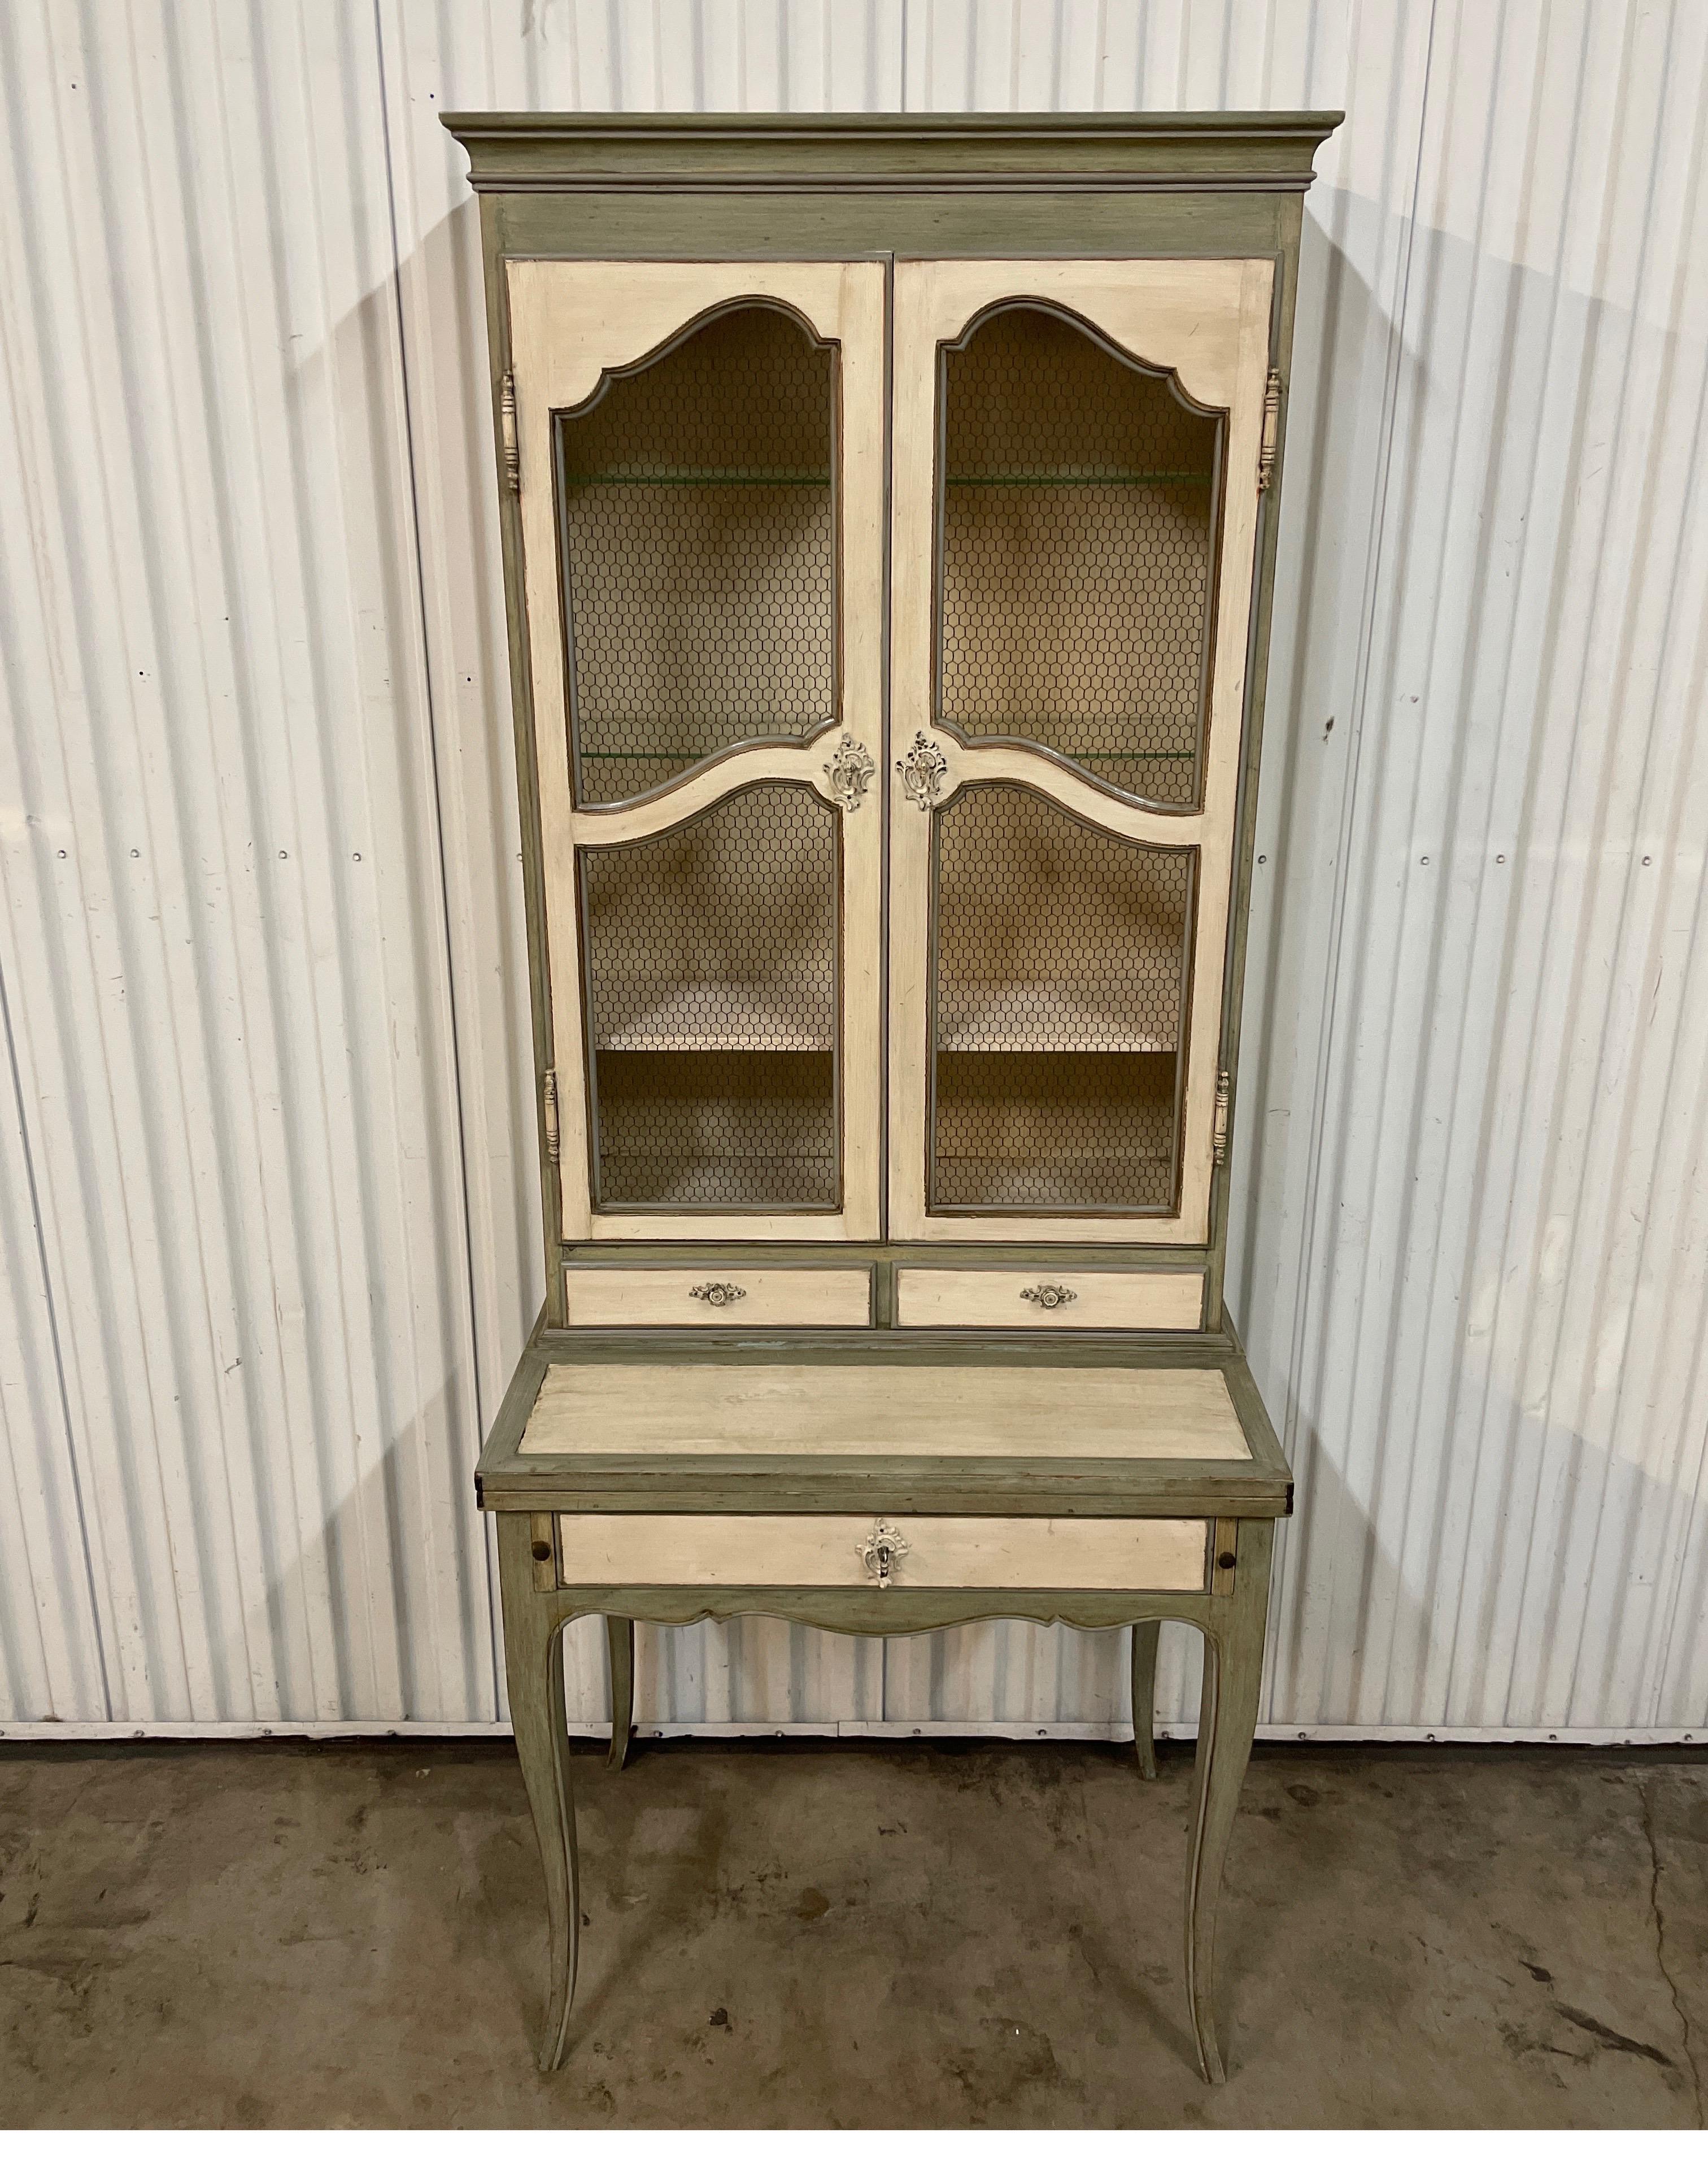 Painted Country French secretary desk / cabinet with chicken wire doors by Baker.